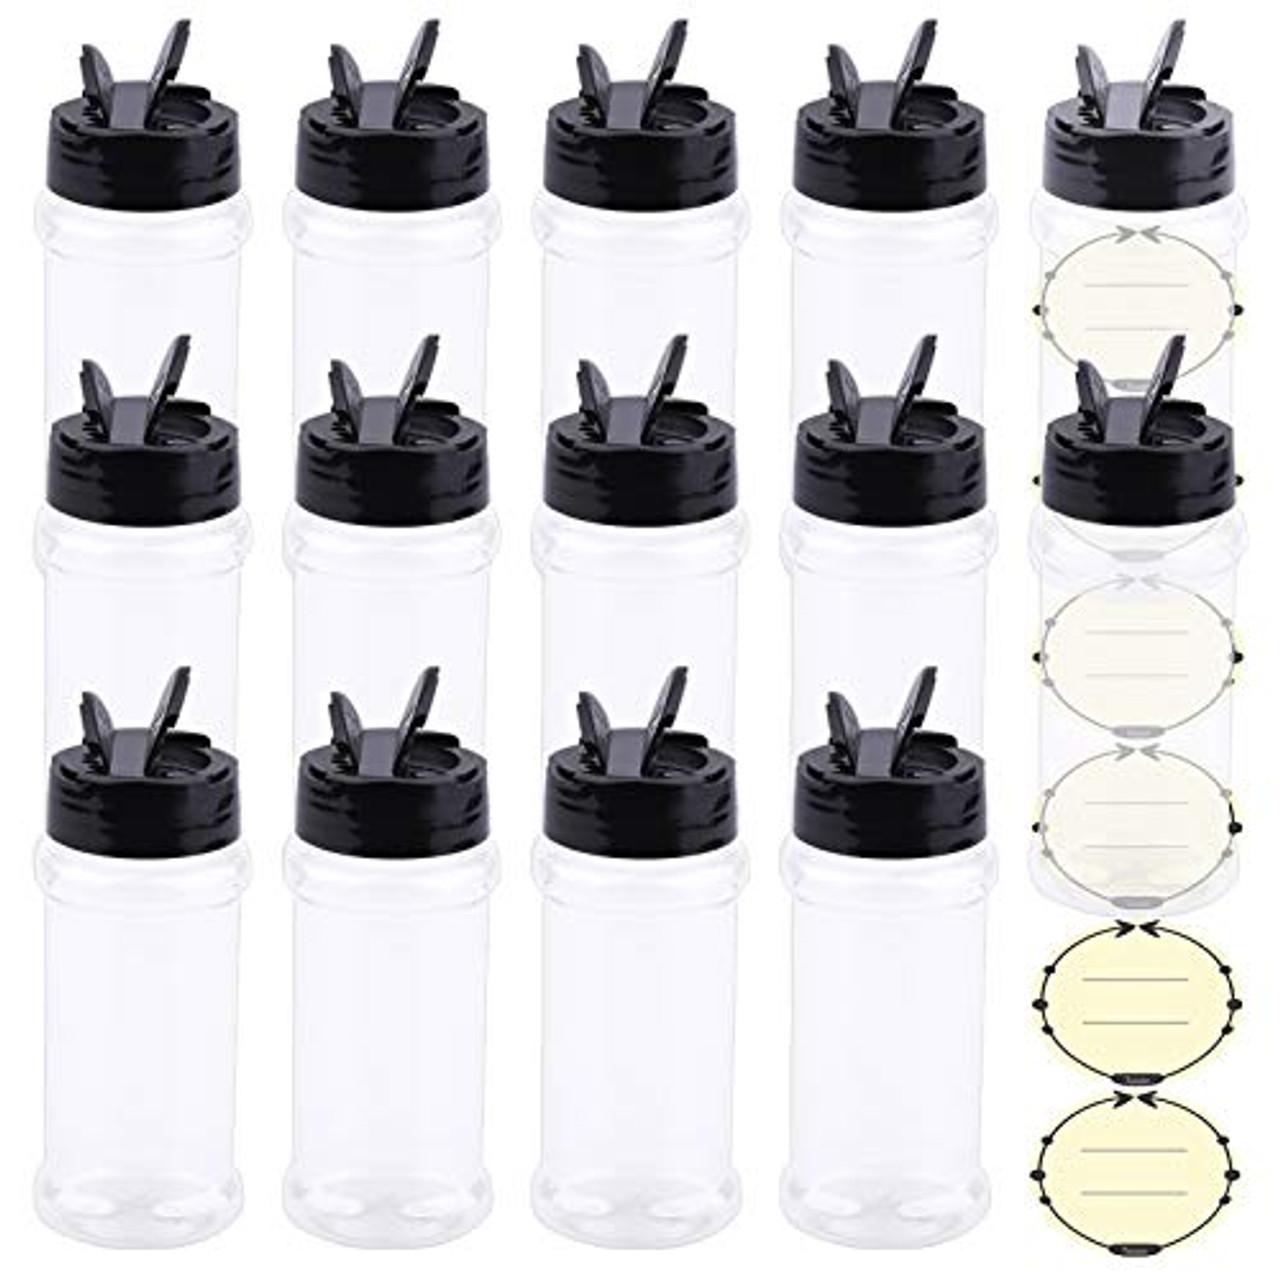 3-Oz Empty Clear Plastic Spice Containers with Lids and Labels, Spice Jars  Bottles Plastic Storage Containers for Storing Spice,Herbs and Seasoning  Powders (14 Pack)